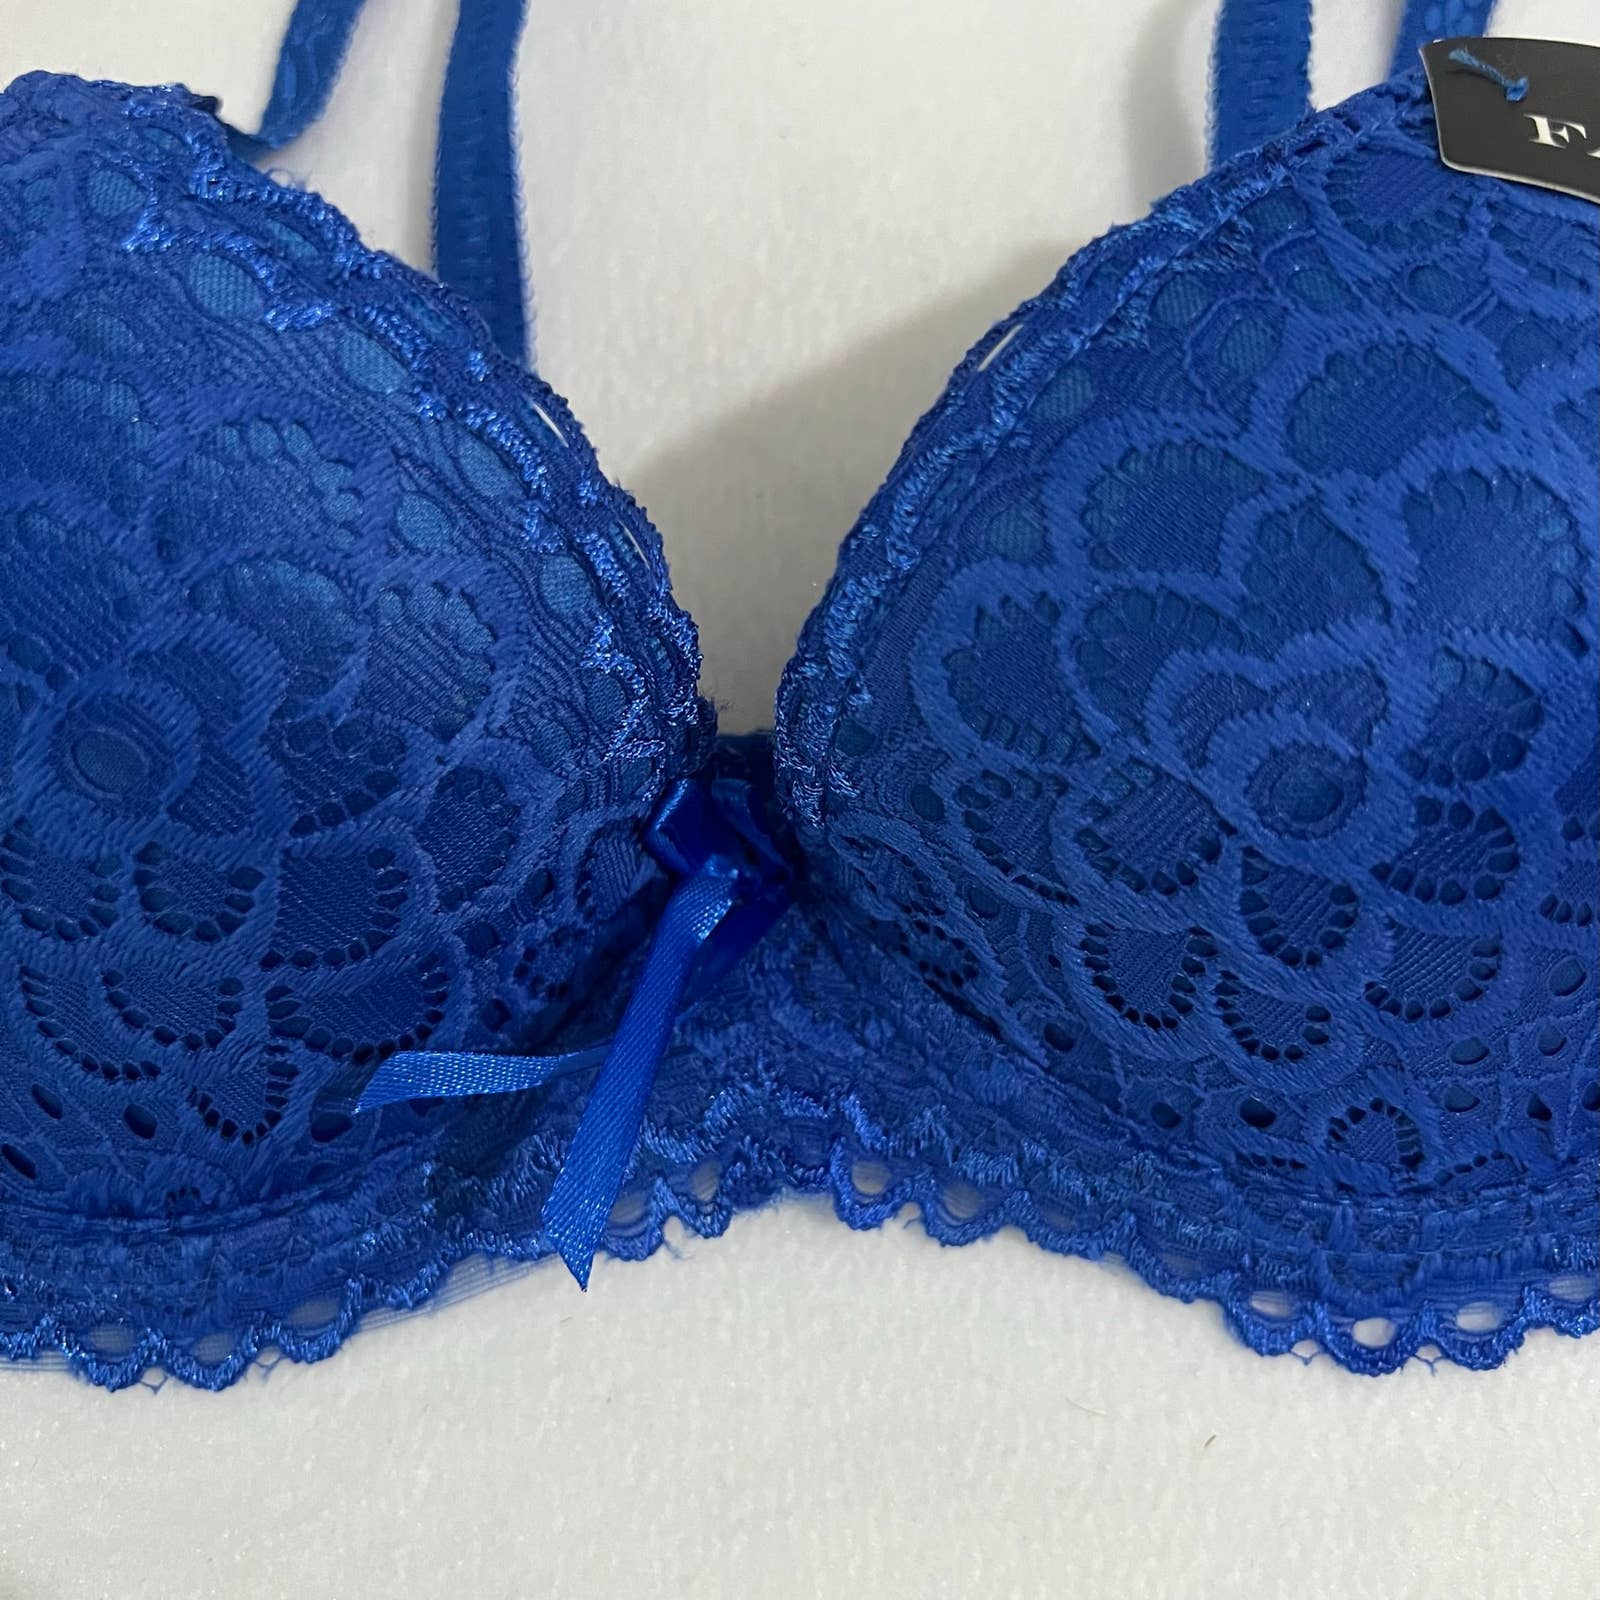 Embroidered Royal Blue Cotton Lace Bra at Rs 130/piece in Surat